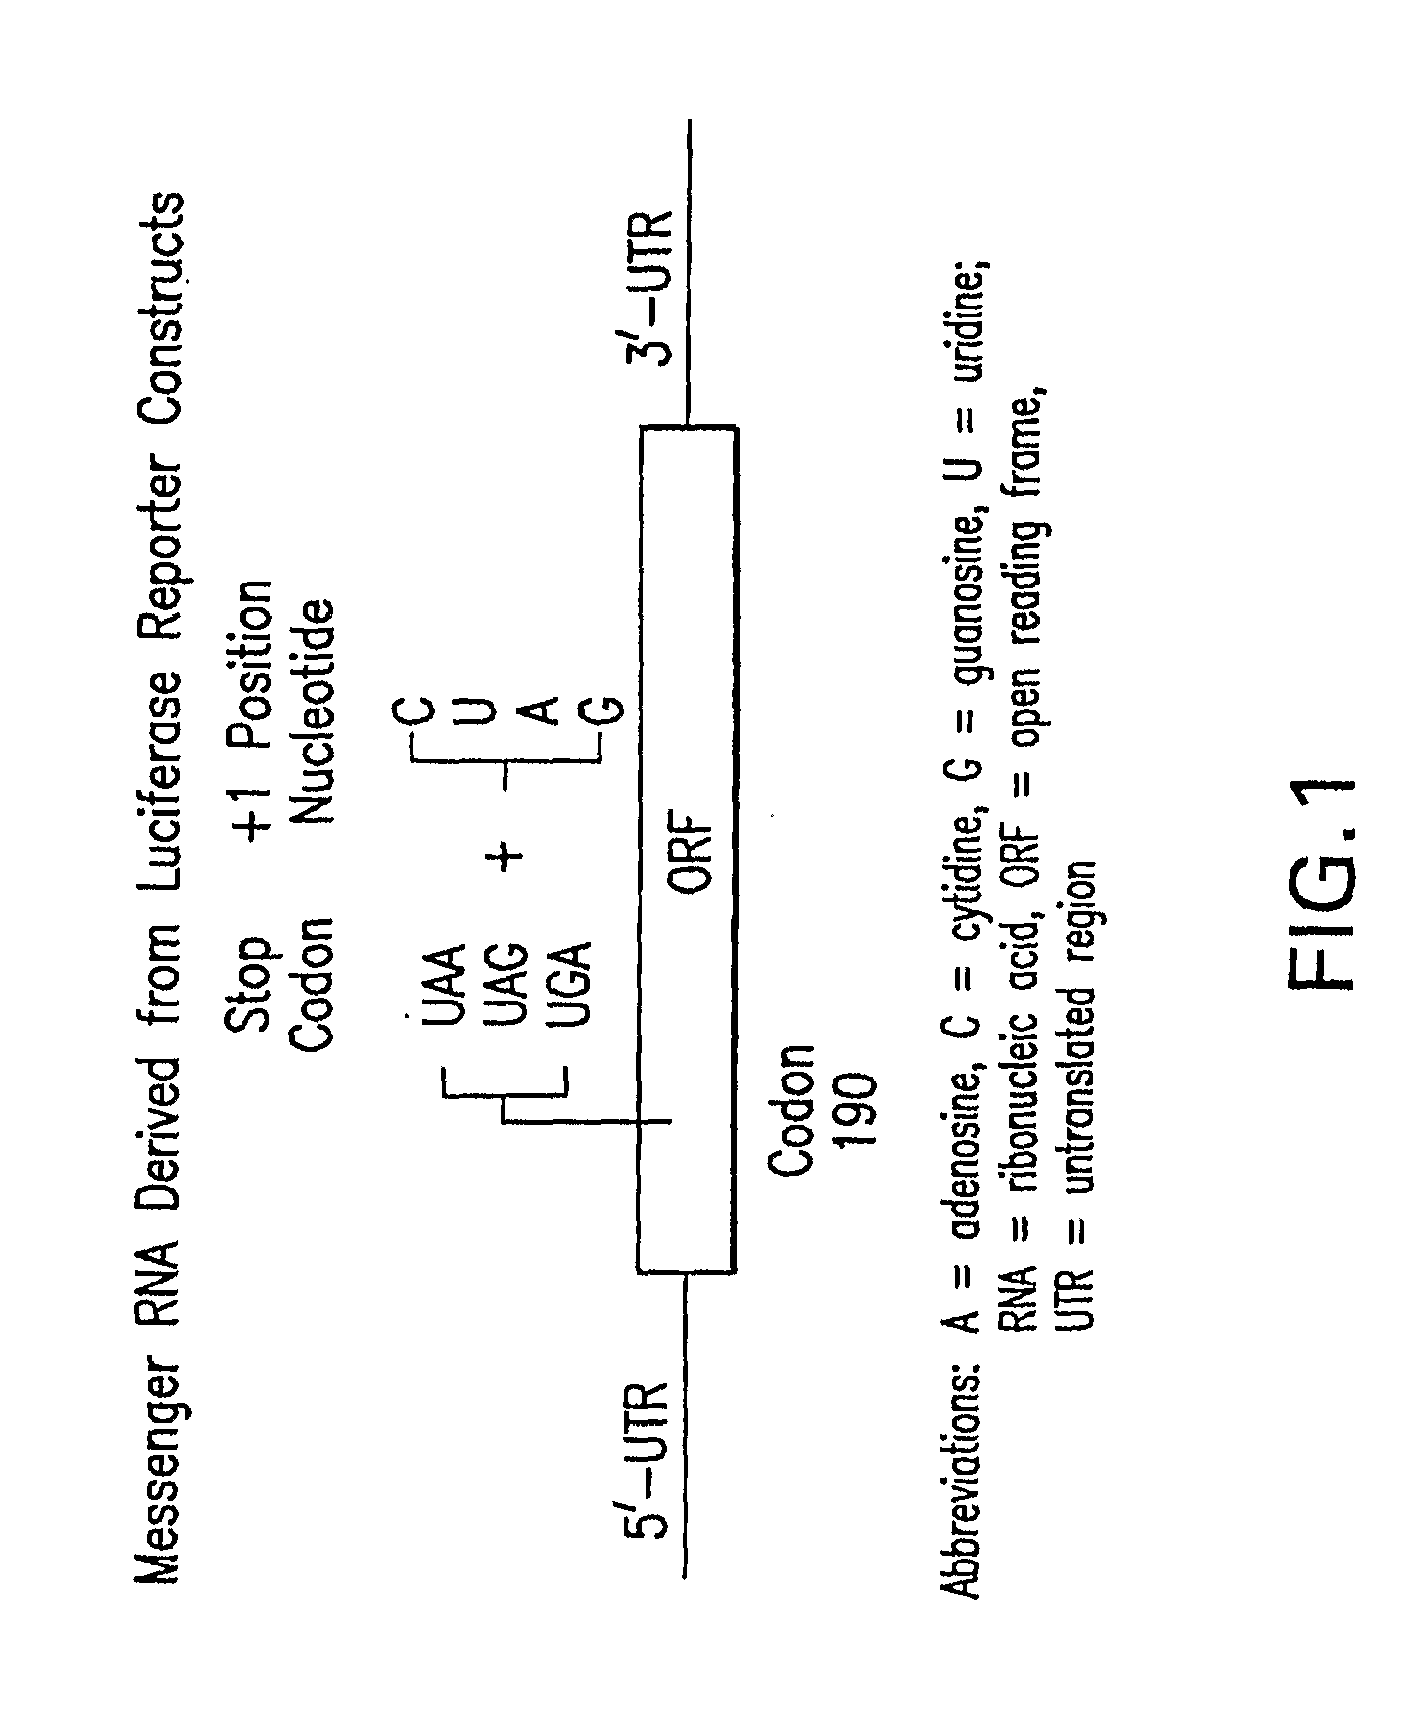 Methods for the production of functional protein from DNA having a nonsense mutation and the treatment of disorders associcated therewith